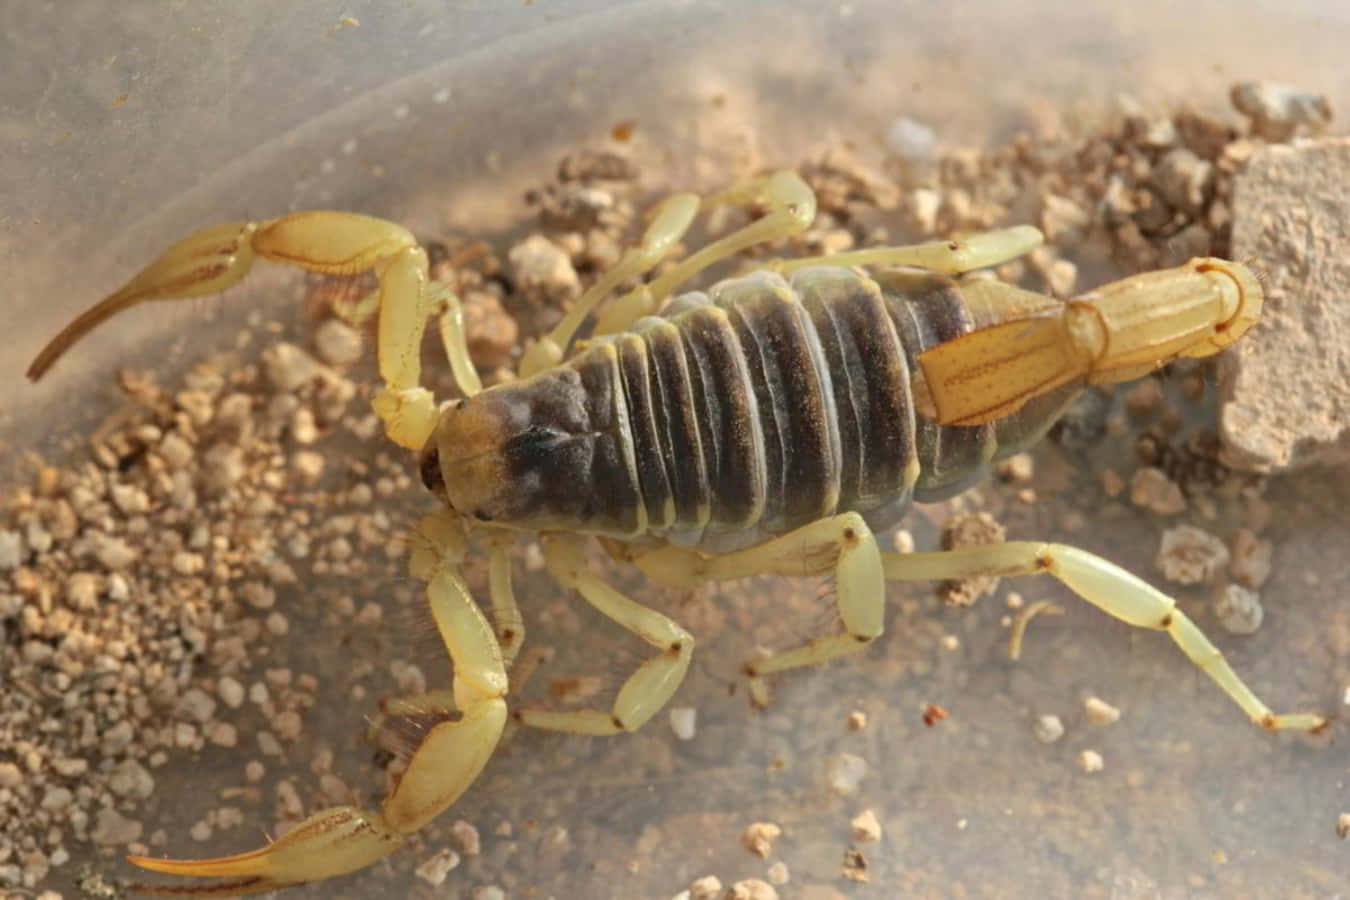 A Scorpion Is Sitting In A Plastic Container